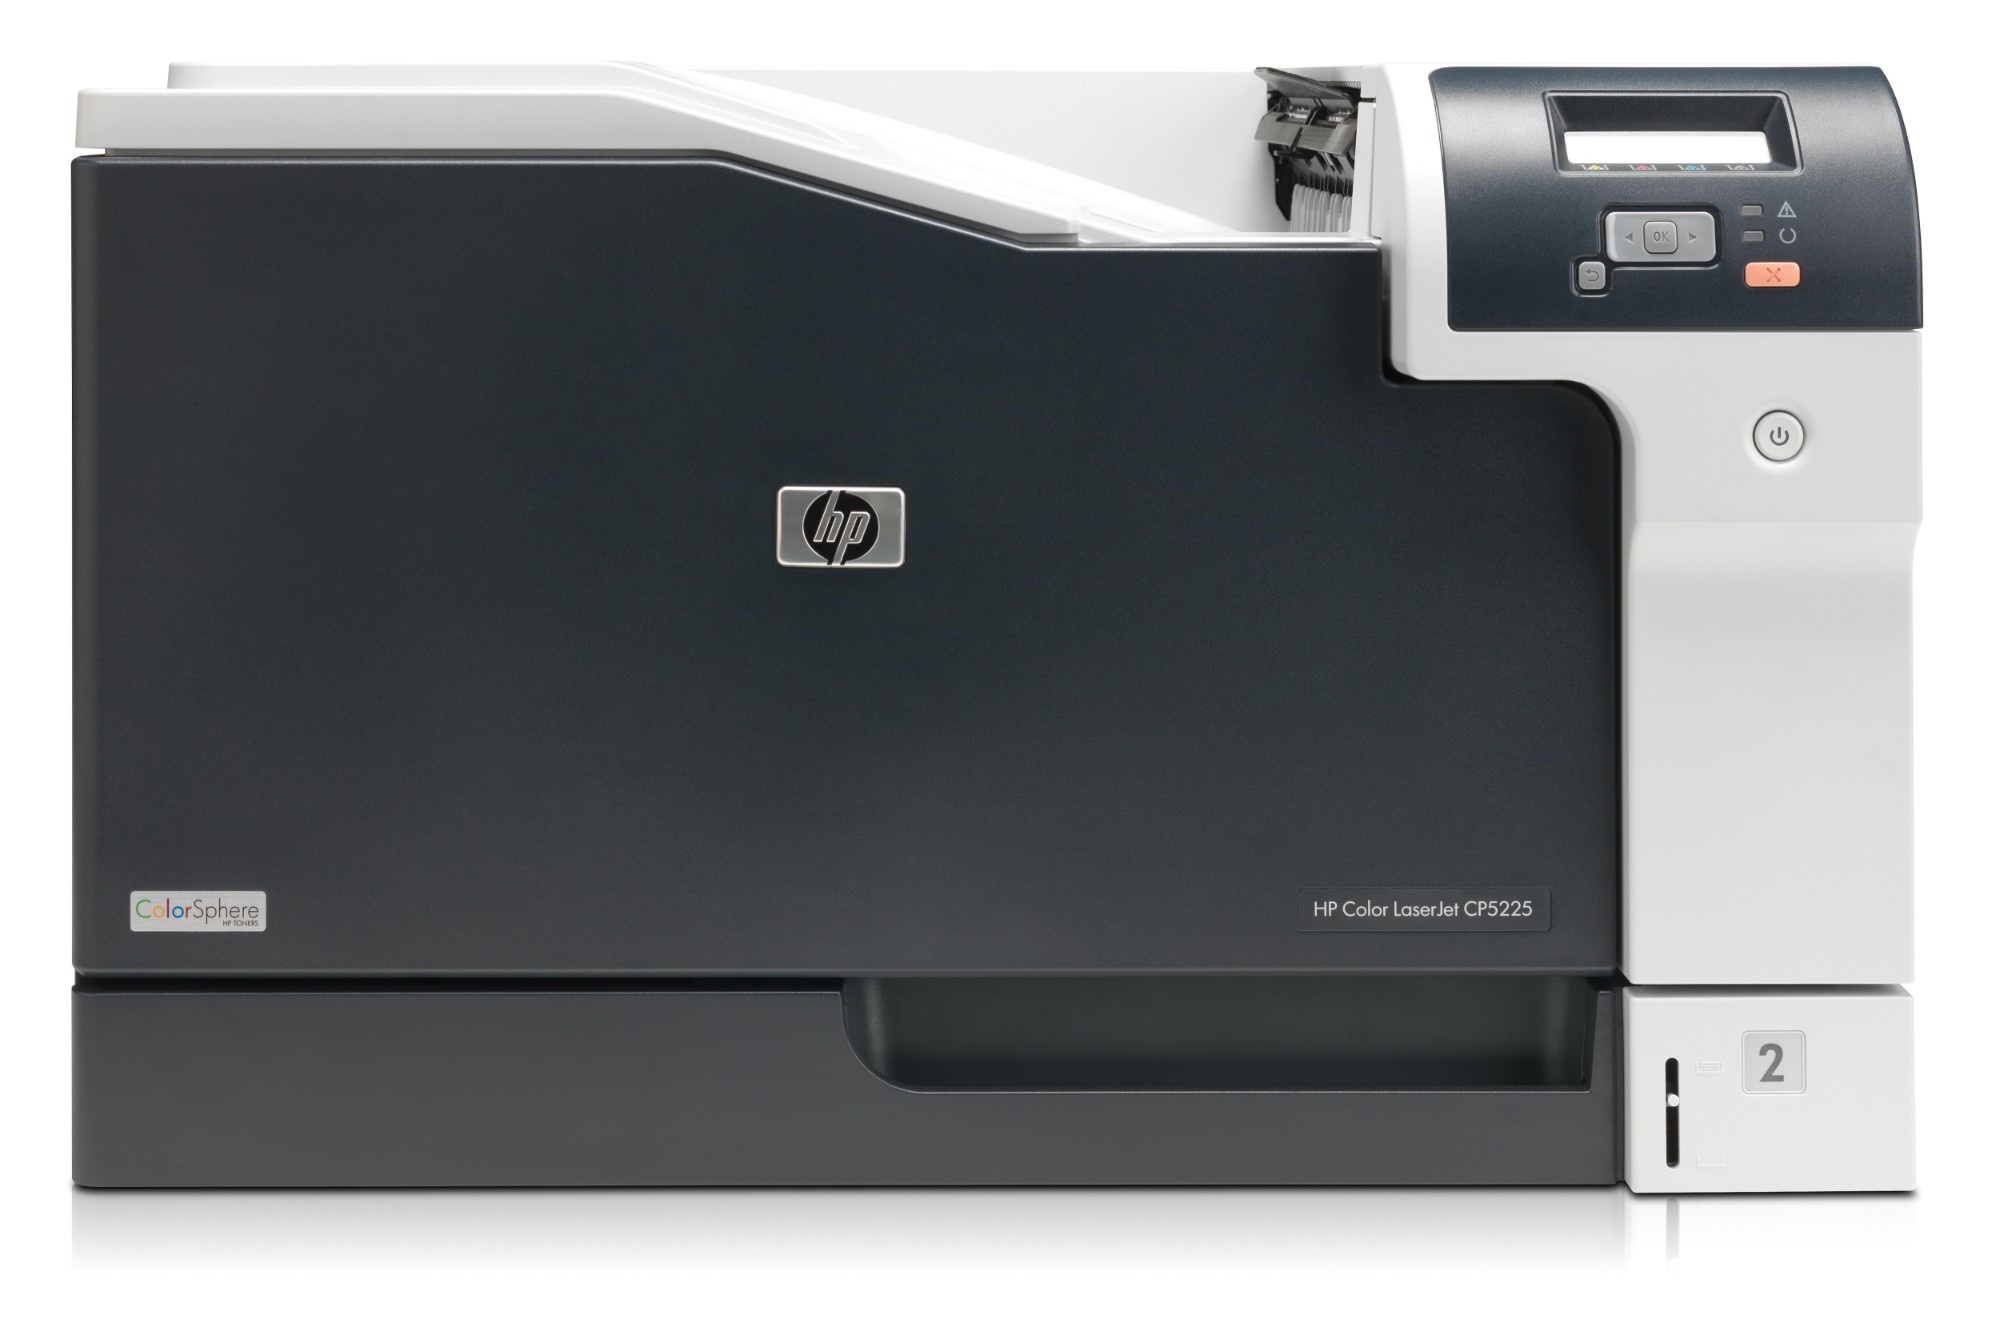 HP Colour LaserJet Professional CP5225dn Printer, Print, Two-sided printing